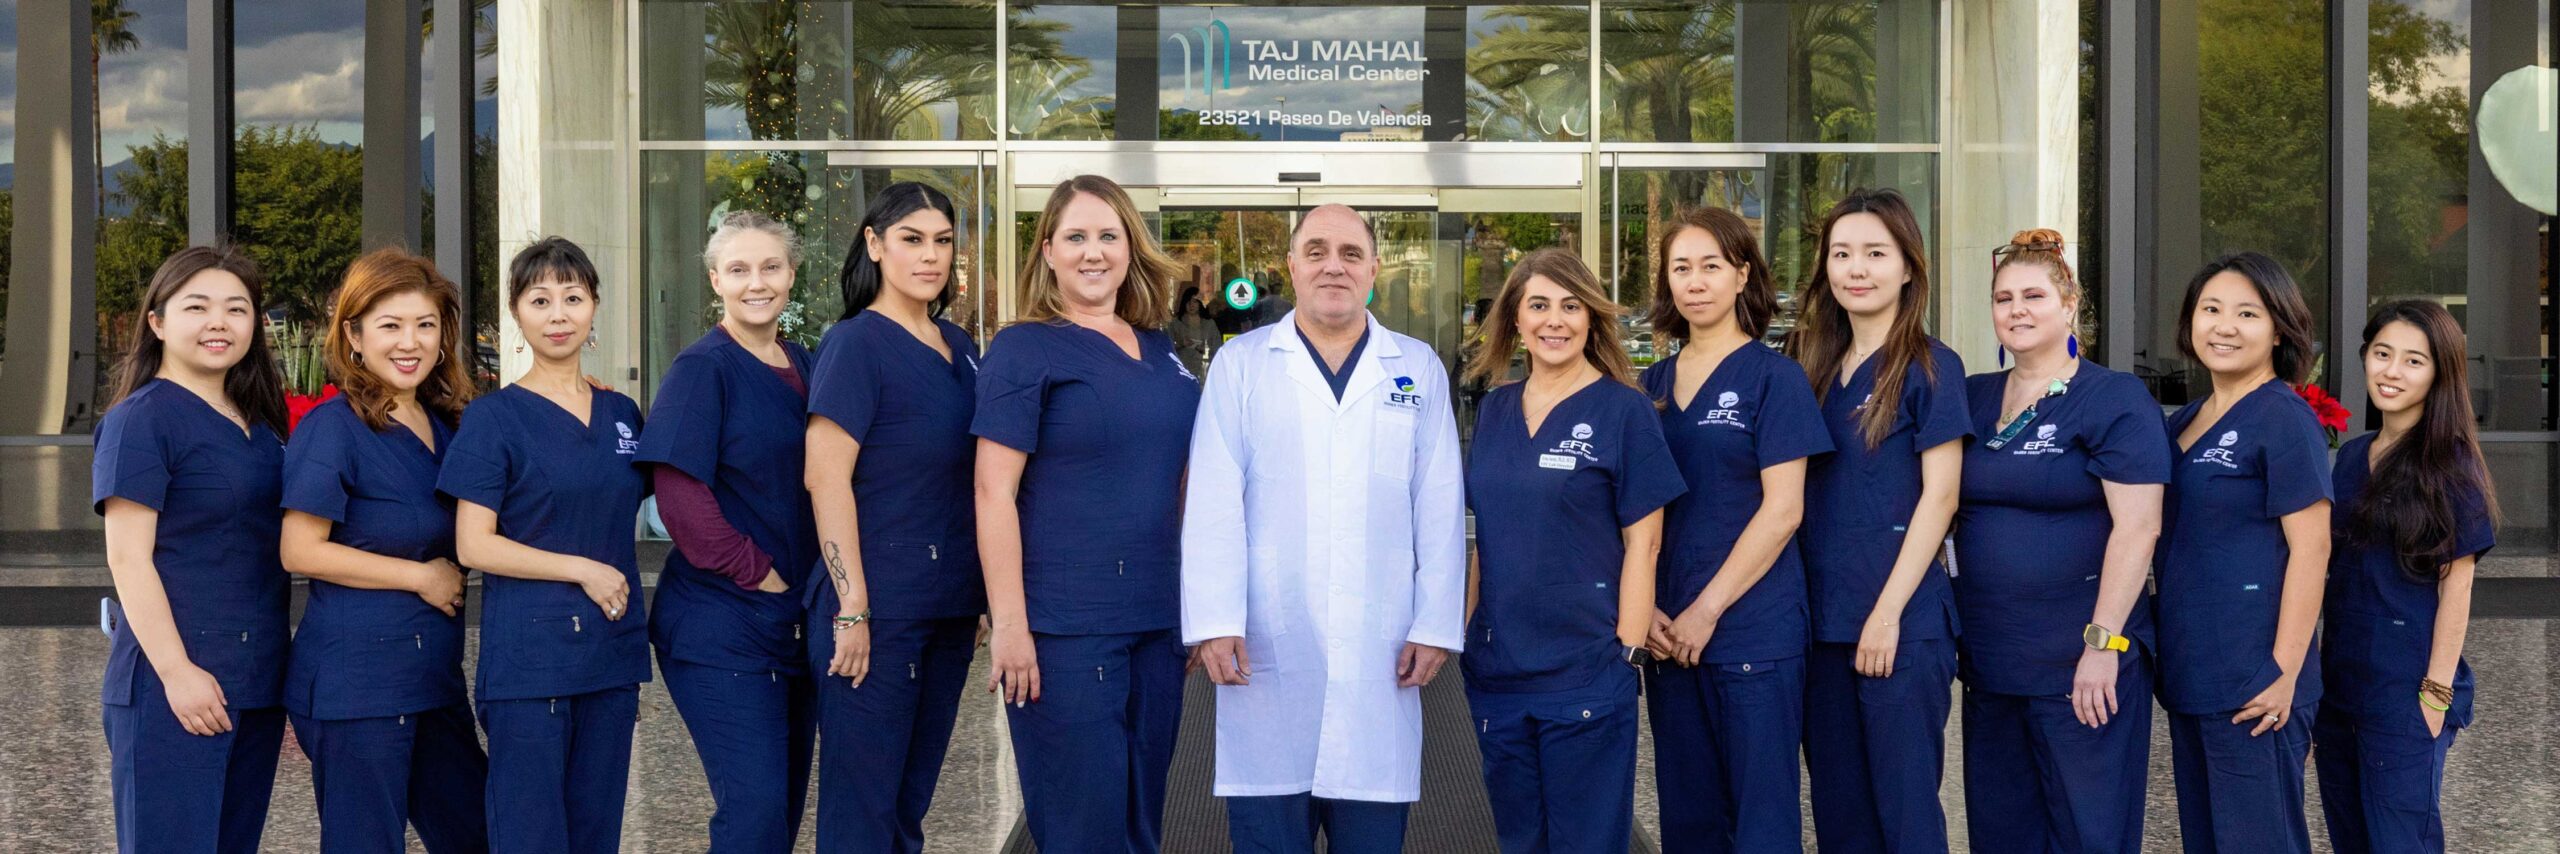 Ember Fertility Center staff standing in a row in front of the Taj Mahal Medical Center in Orange County, CA